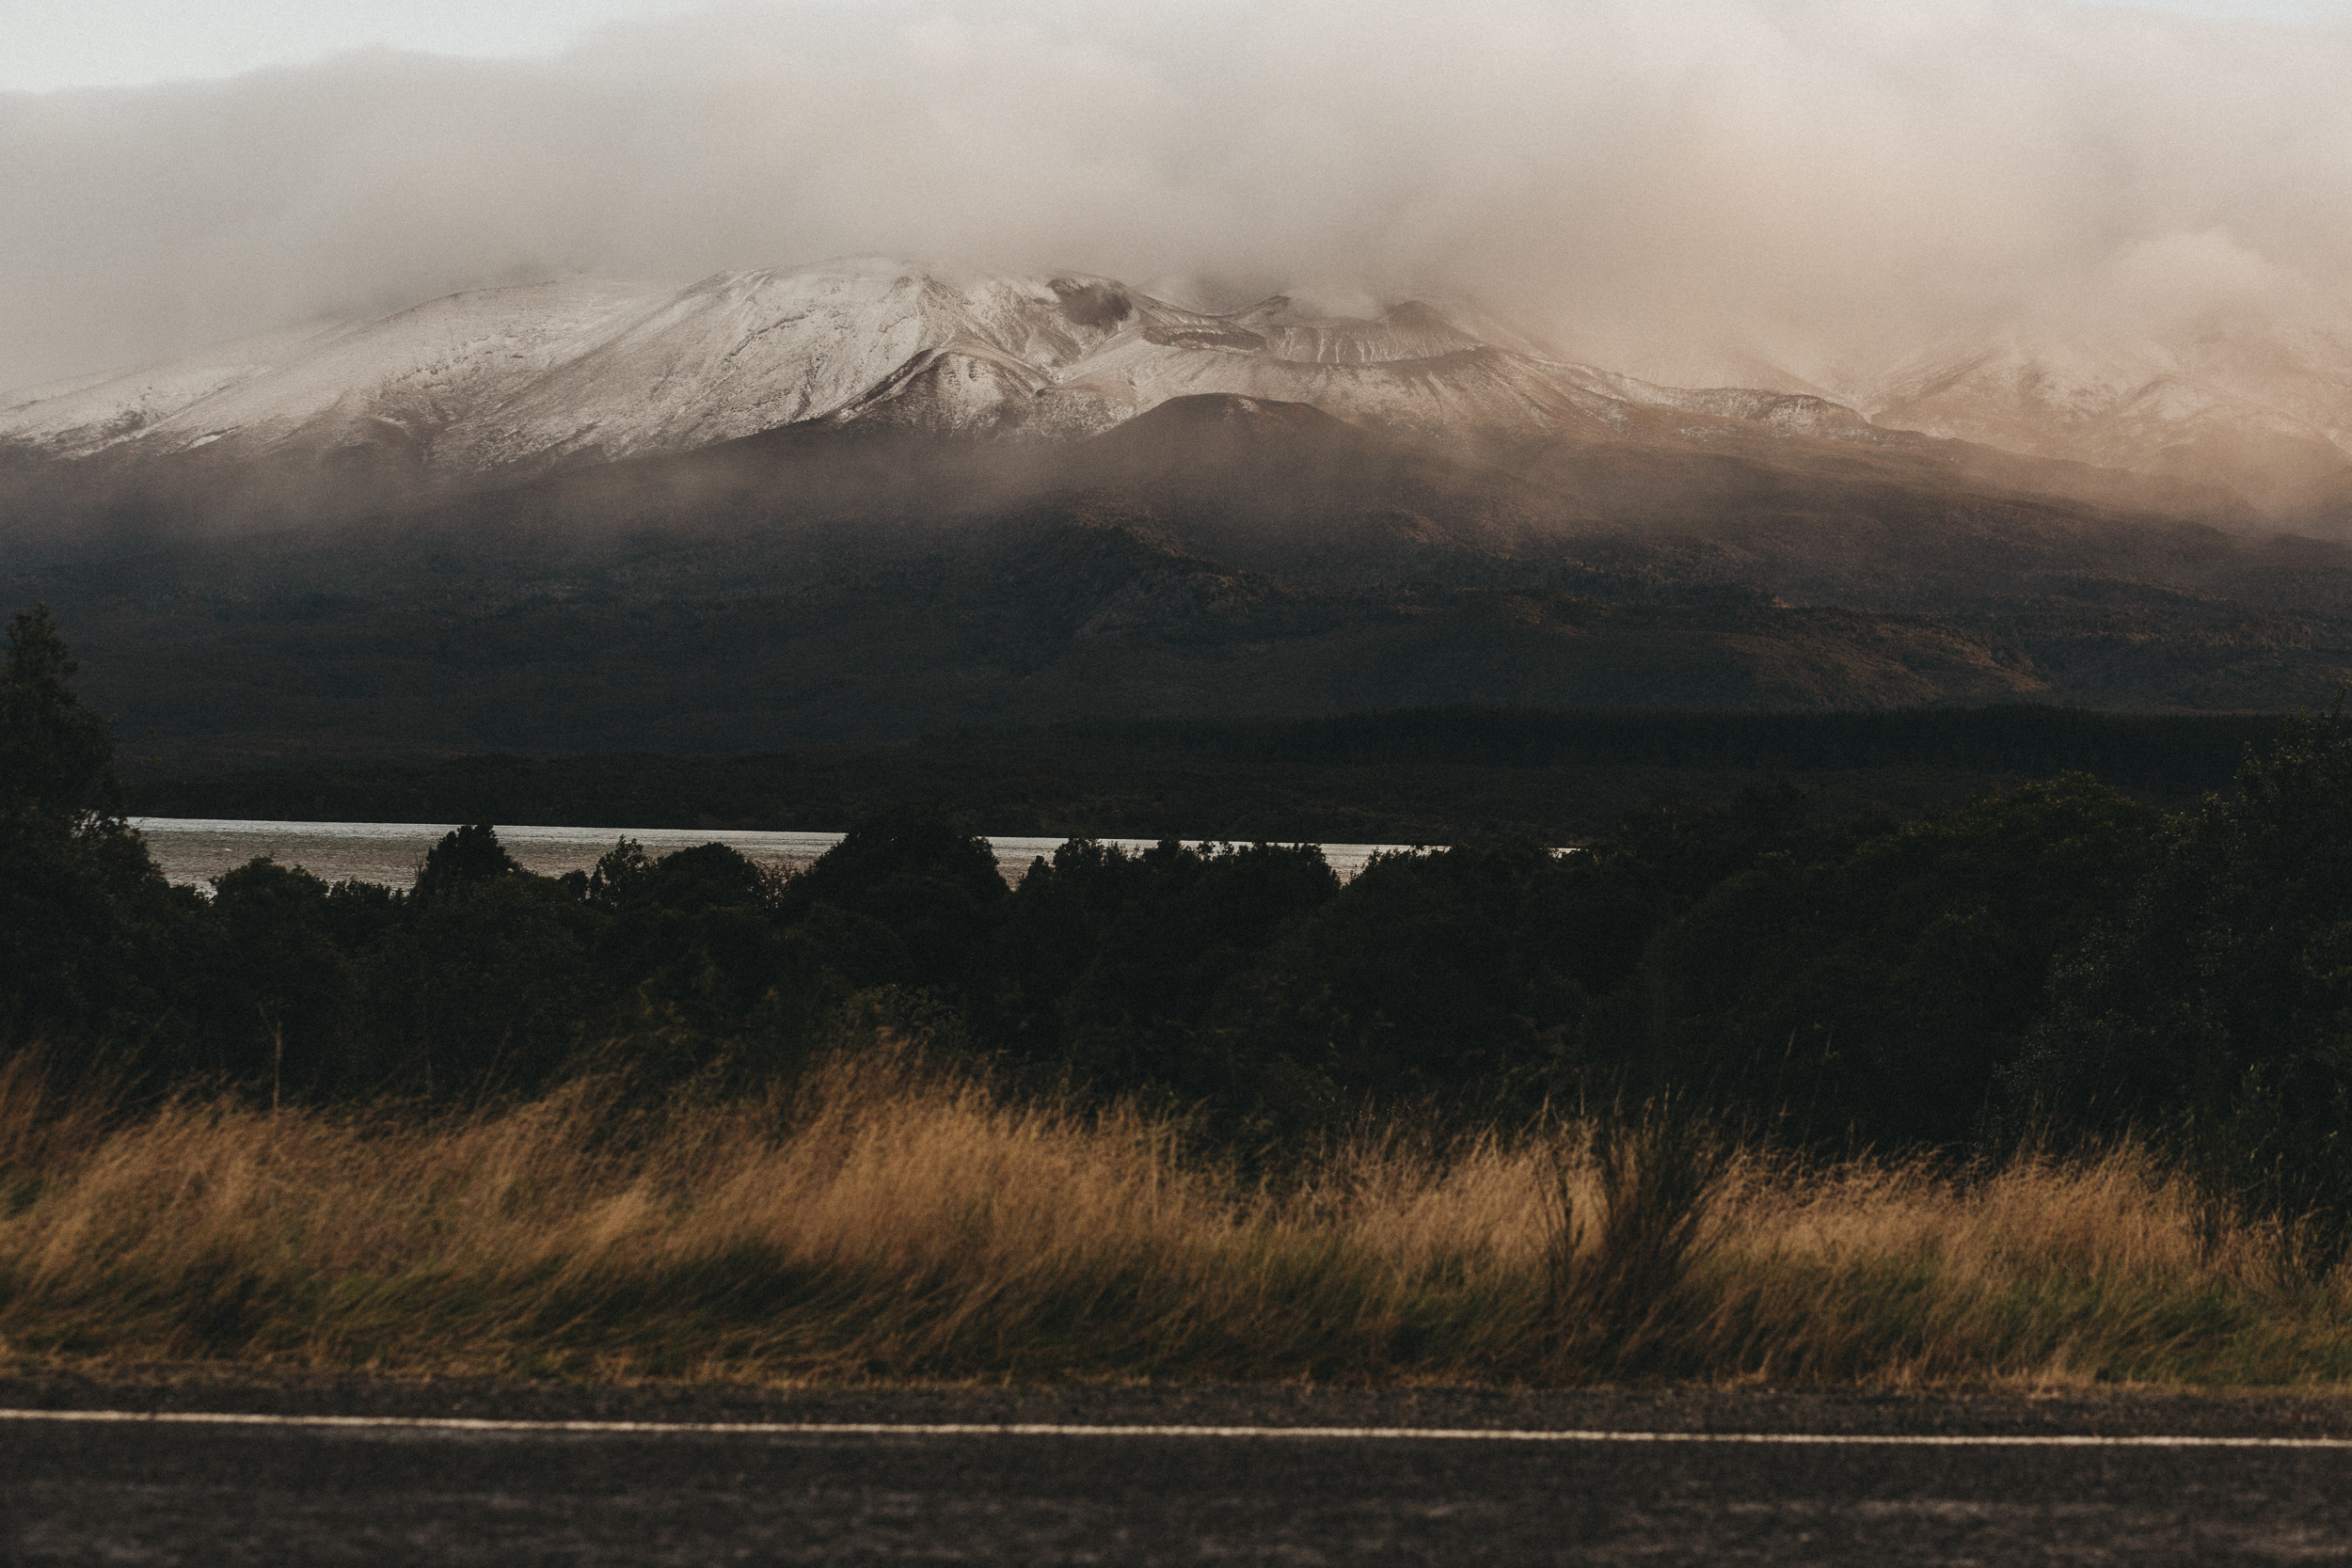 Day Two: views from the car as we drive past the volcanic mountains and Lake Rotoaira at sunset.